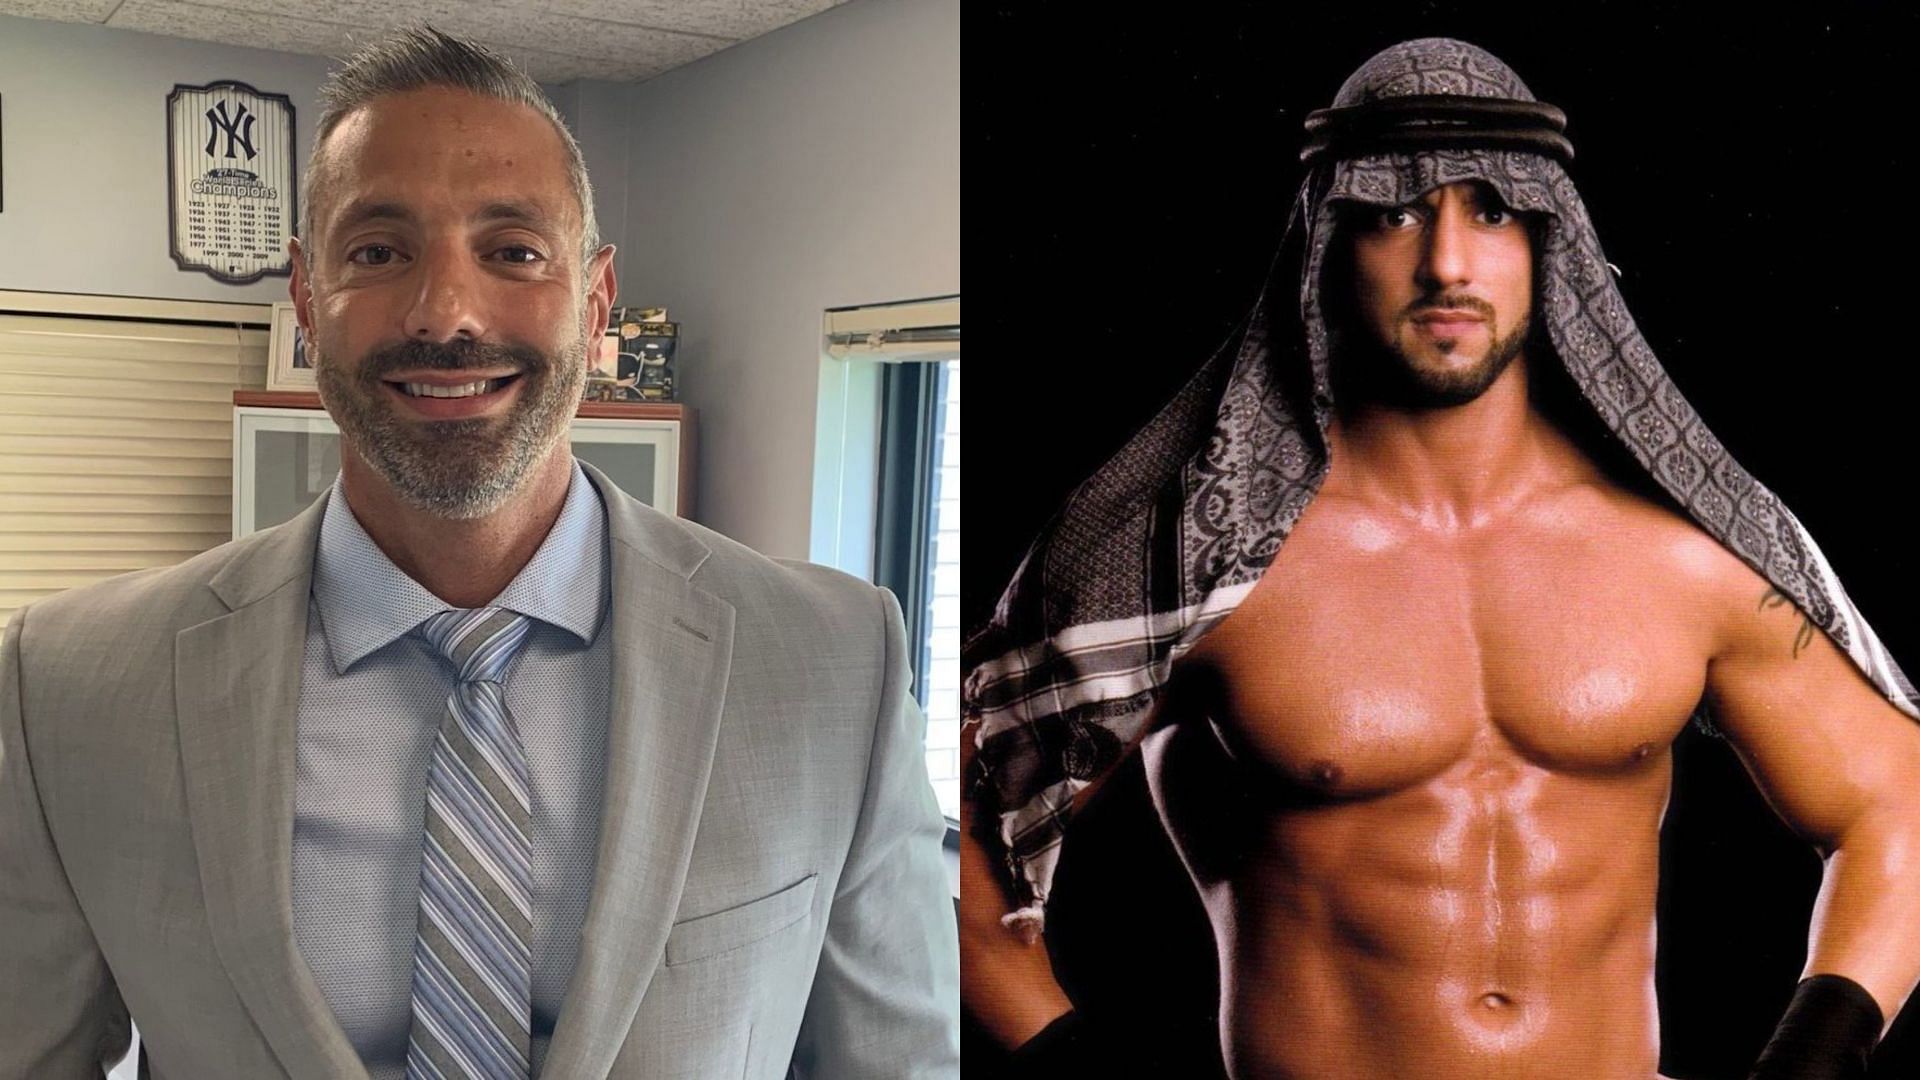 Marc Copani (fka Muhammad Hassan) retired from wrestling after leaving WWE.